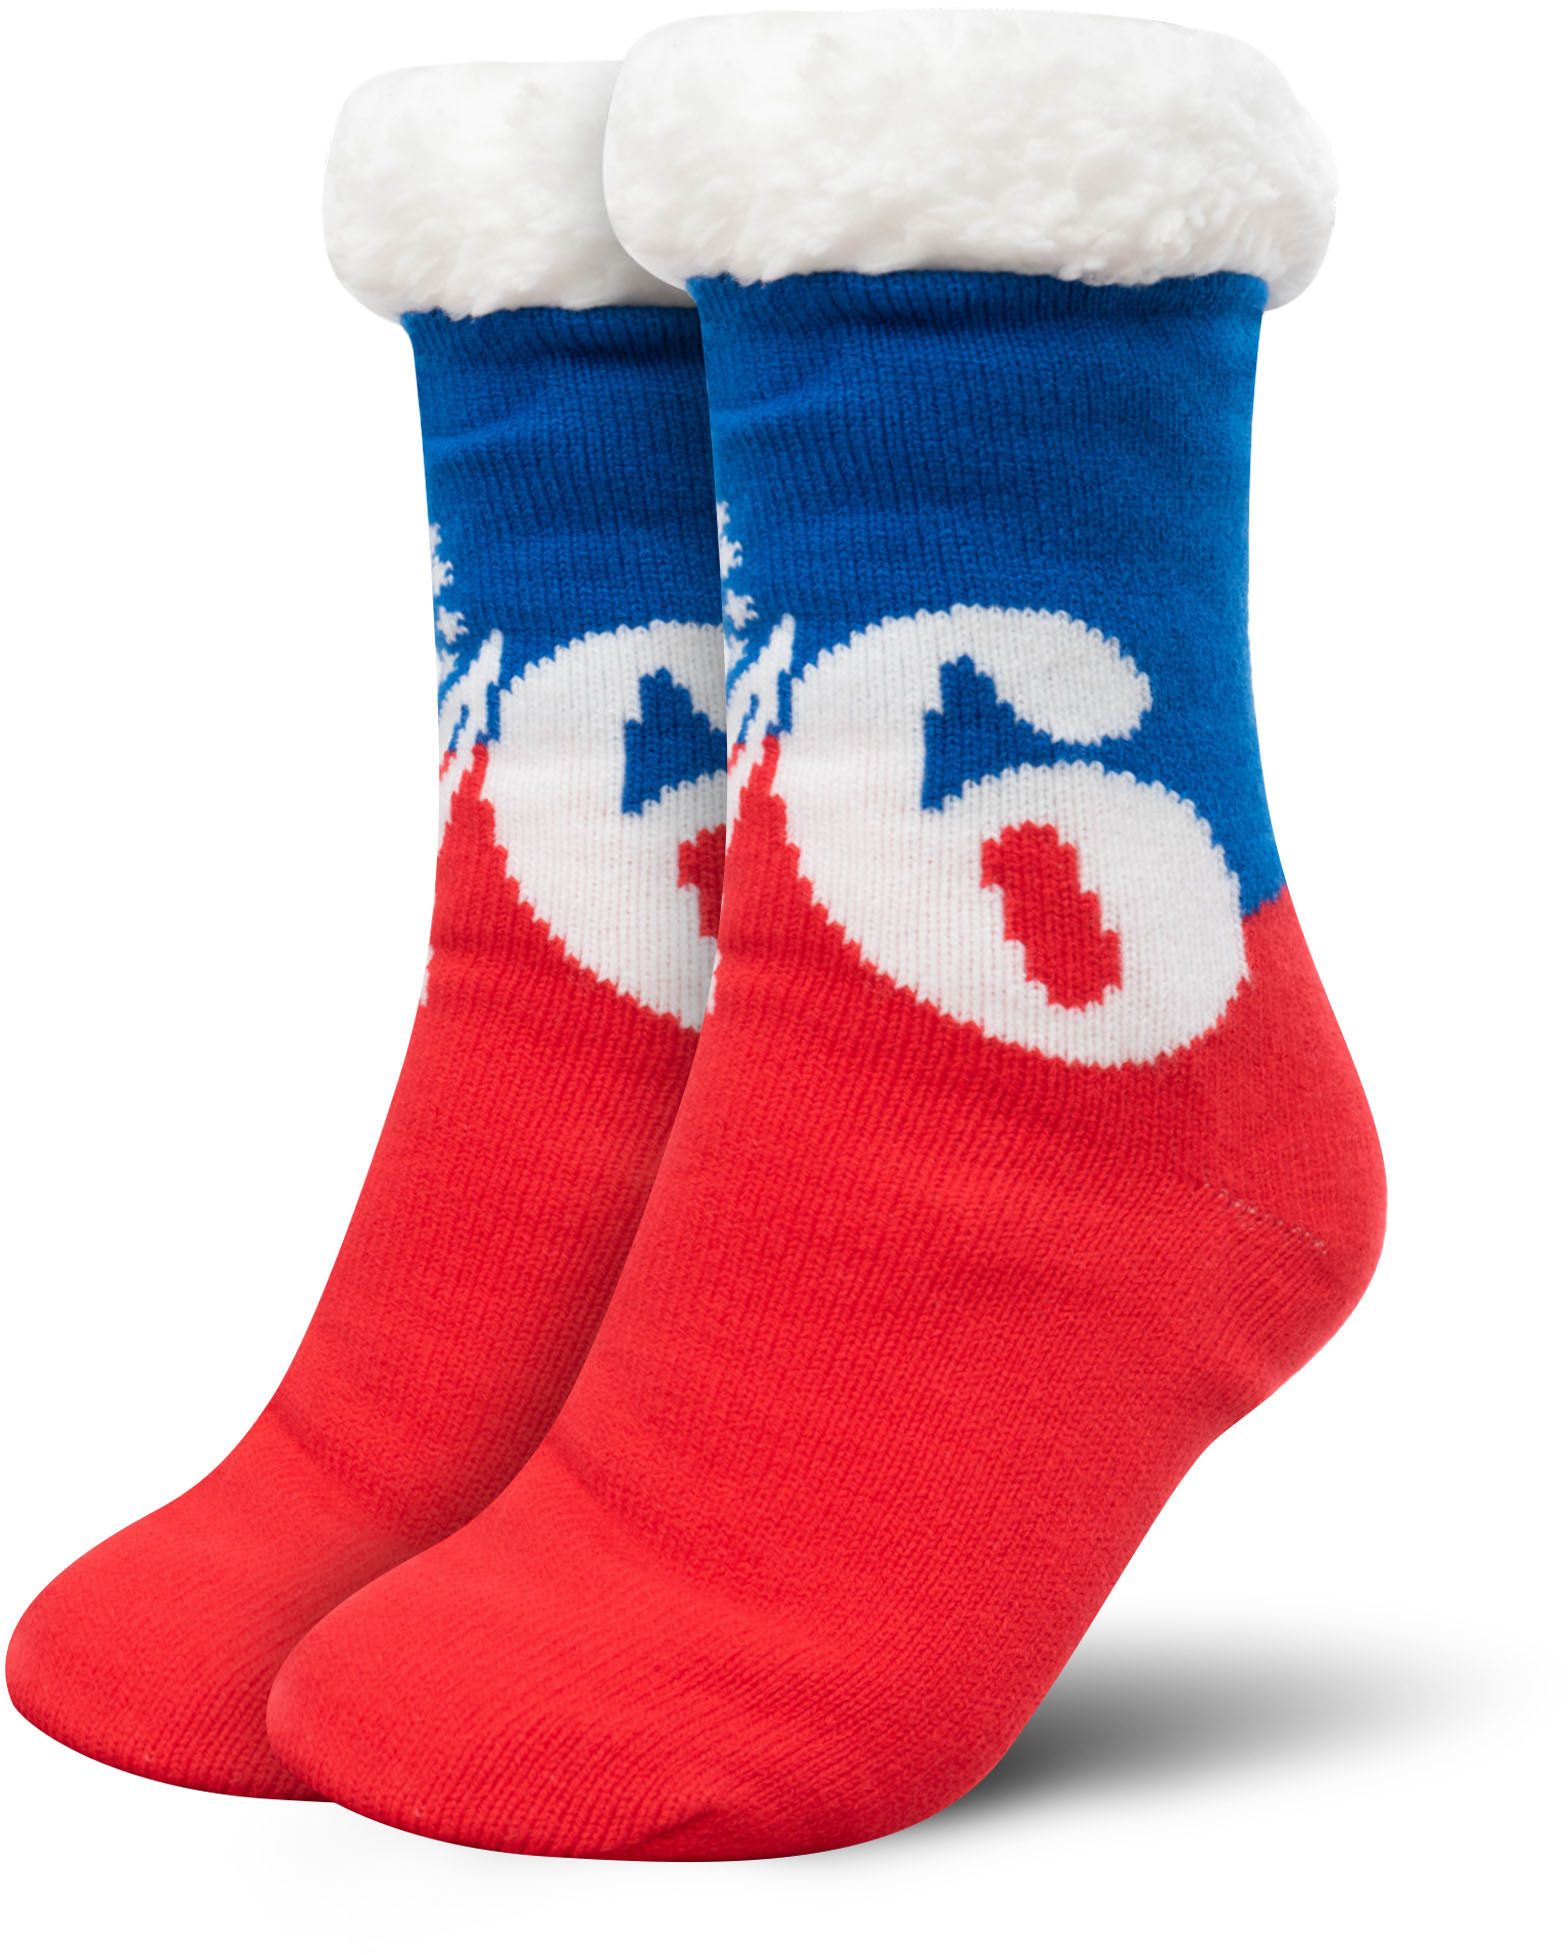 76ers slippers